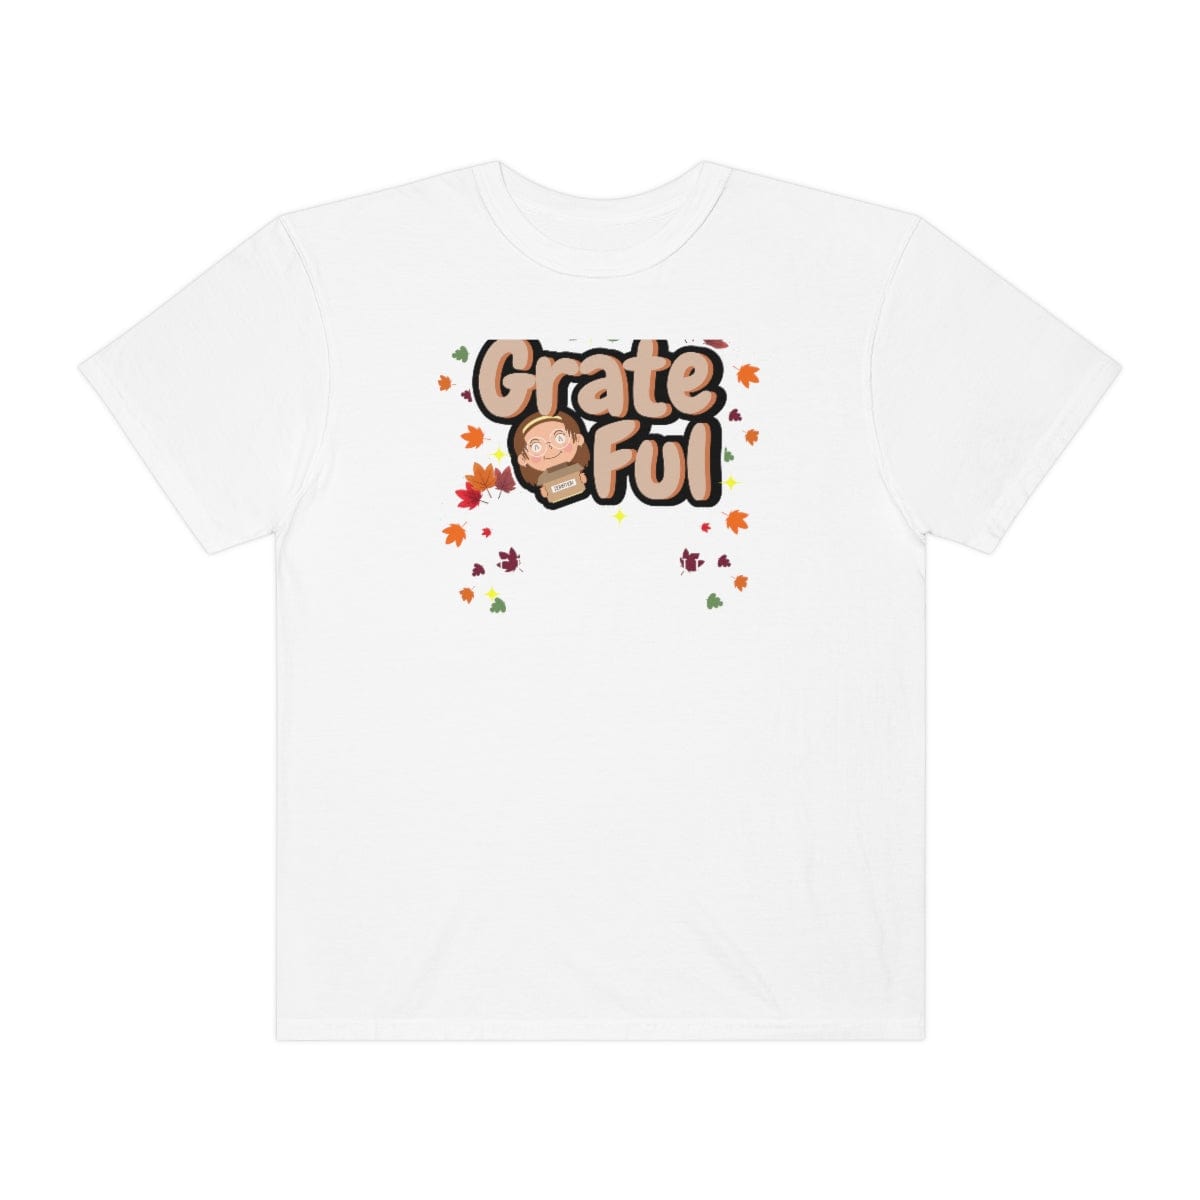 Grate Ful For A Thoughtful Heart T-Shirt For Women Girl